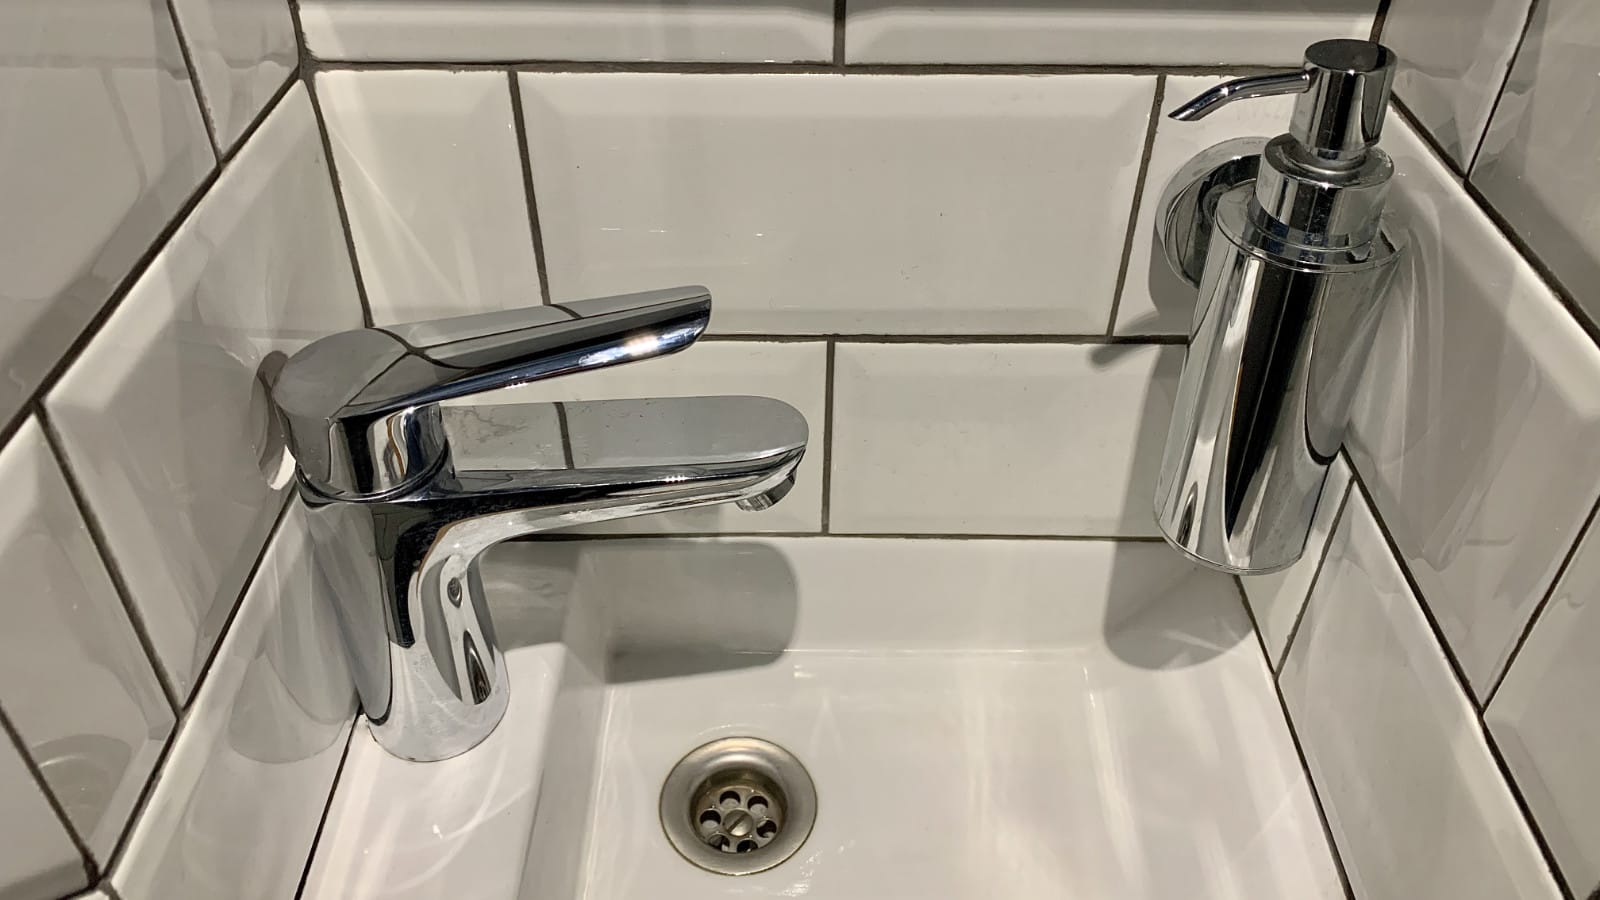 A modern chrome faucet and soap dispenser set against white subway tile over a bathroom sink, reflecting potential areas of concern for new homeowners assessing plumbing conditions.